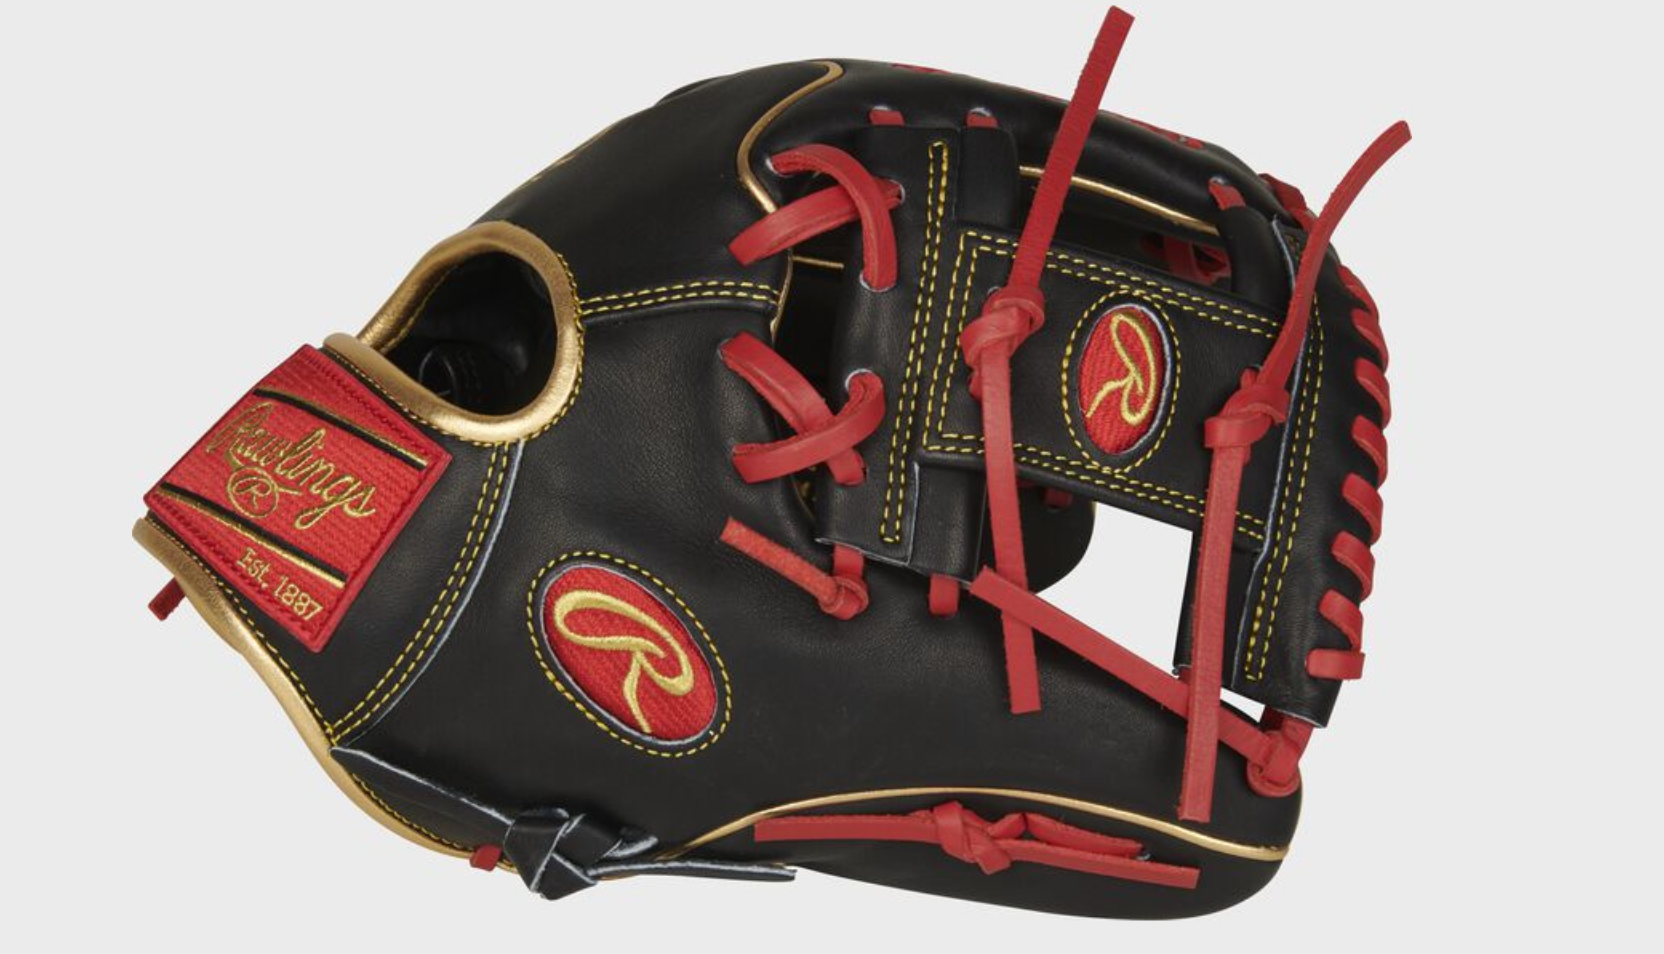 Rawlings 2021 Heart of the Hide Infield Glove